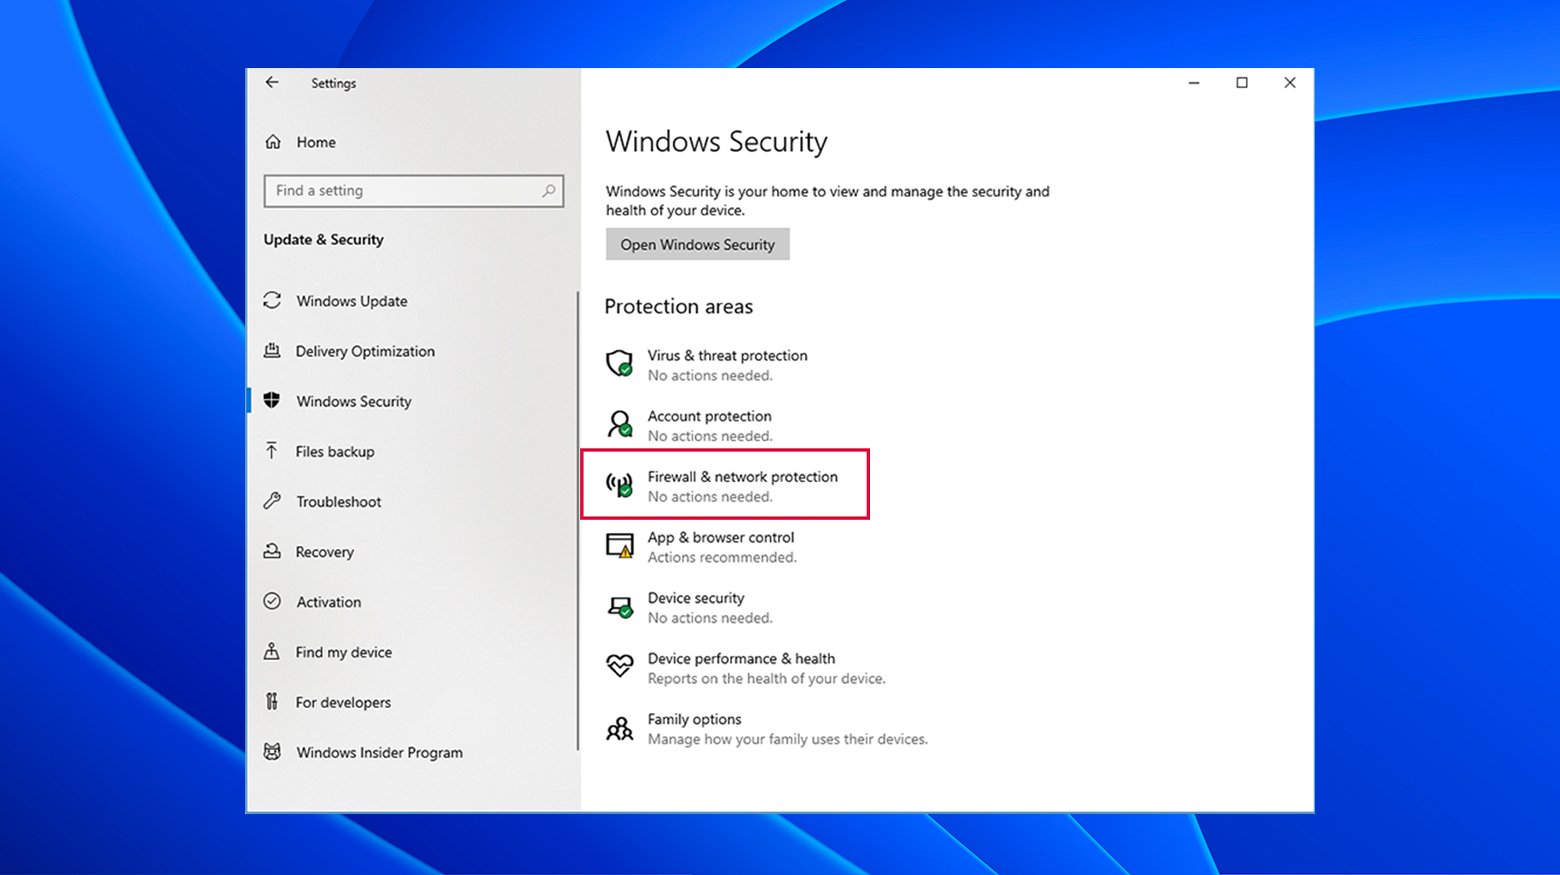 Firewall and network protection in Windows Security settings.